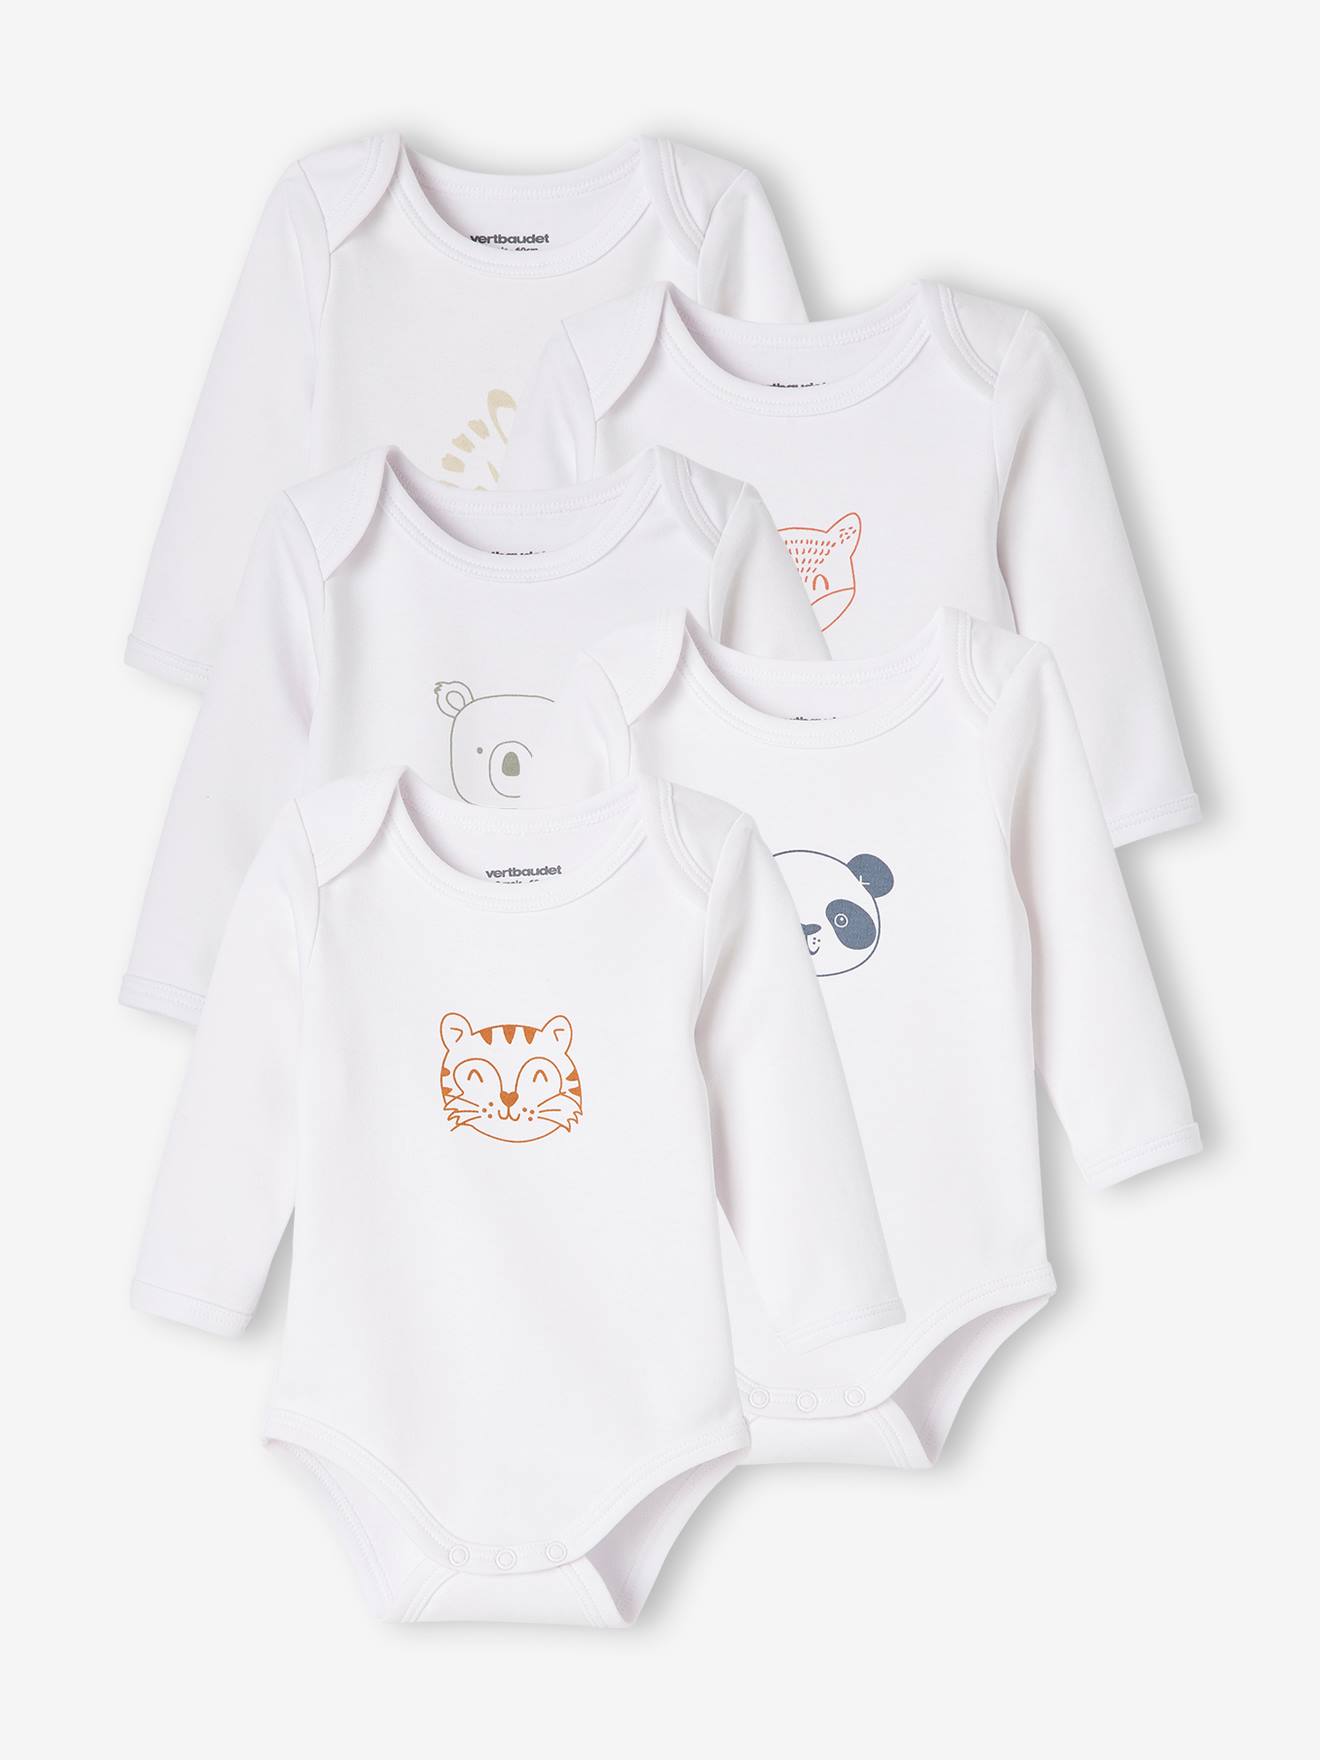 Pack of 5 "Animals" Long Sleeve Bodysuits for Newborn Babies, Cutaway Shoulders white light two color/multicol